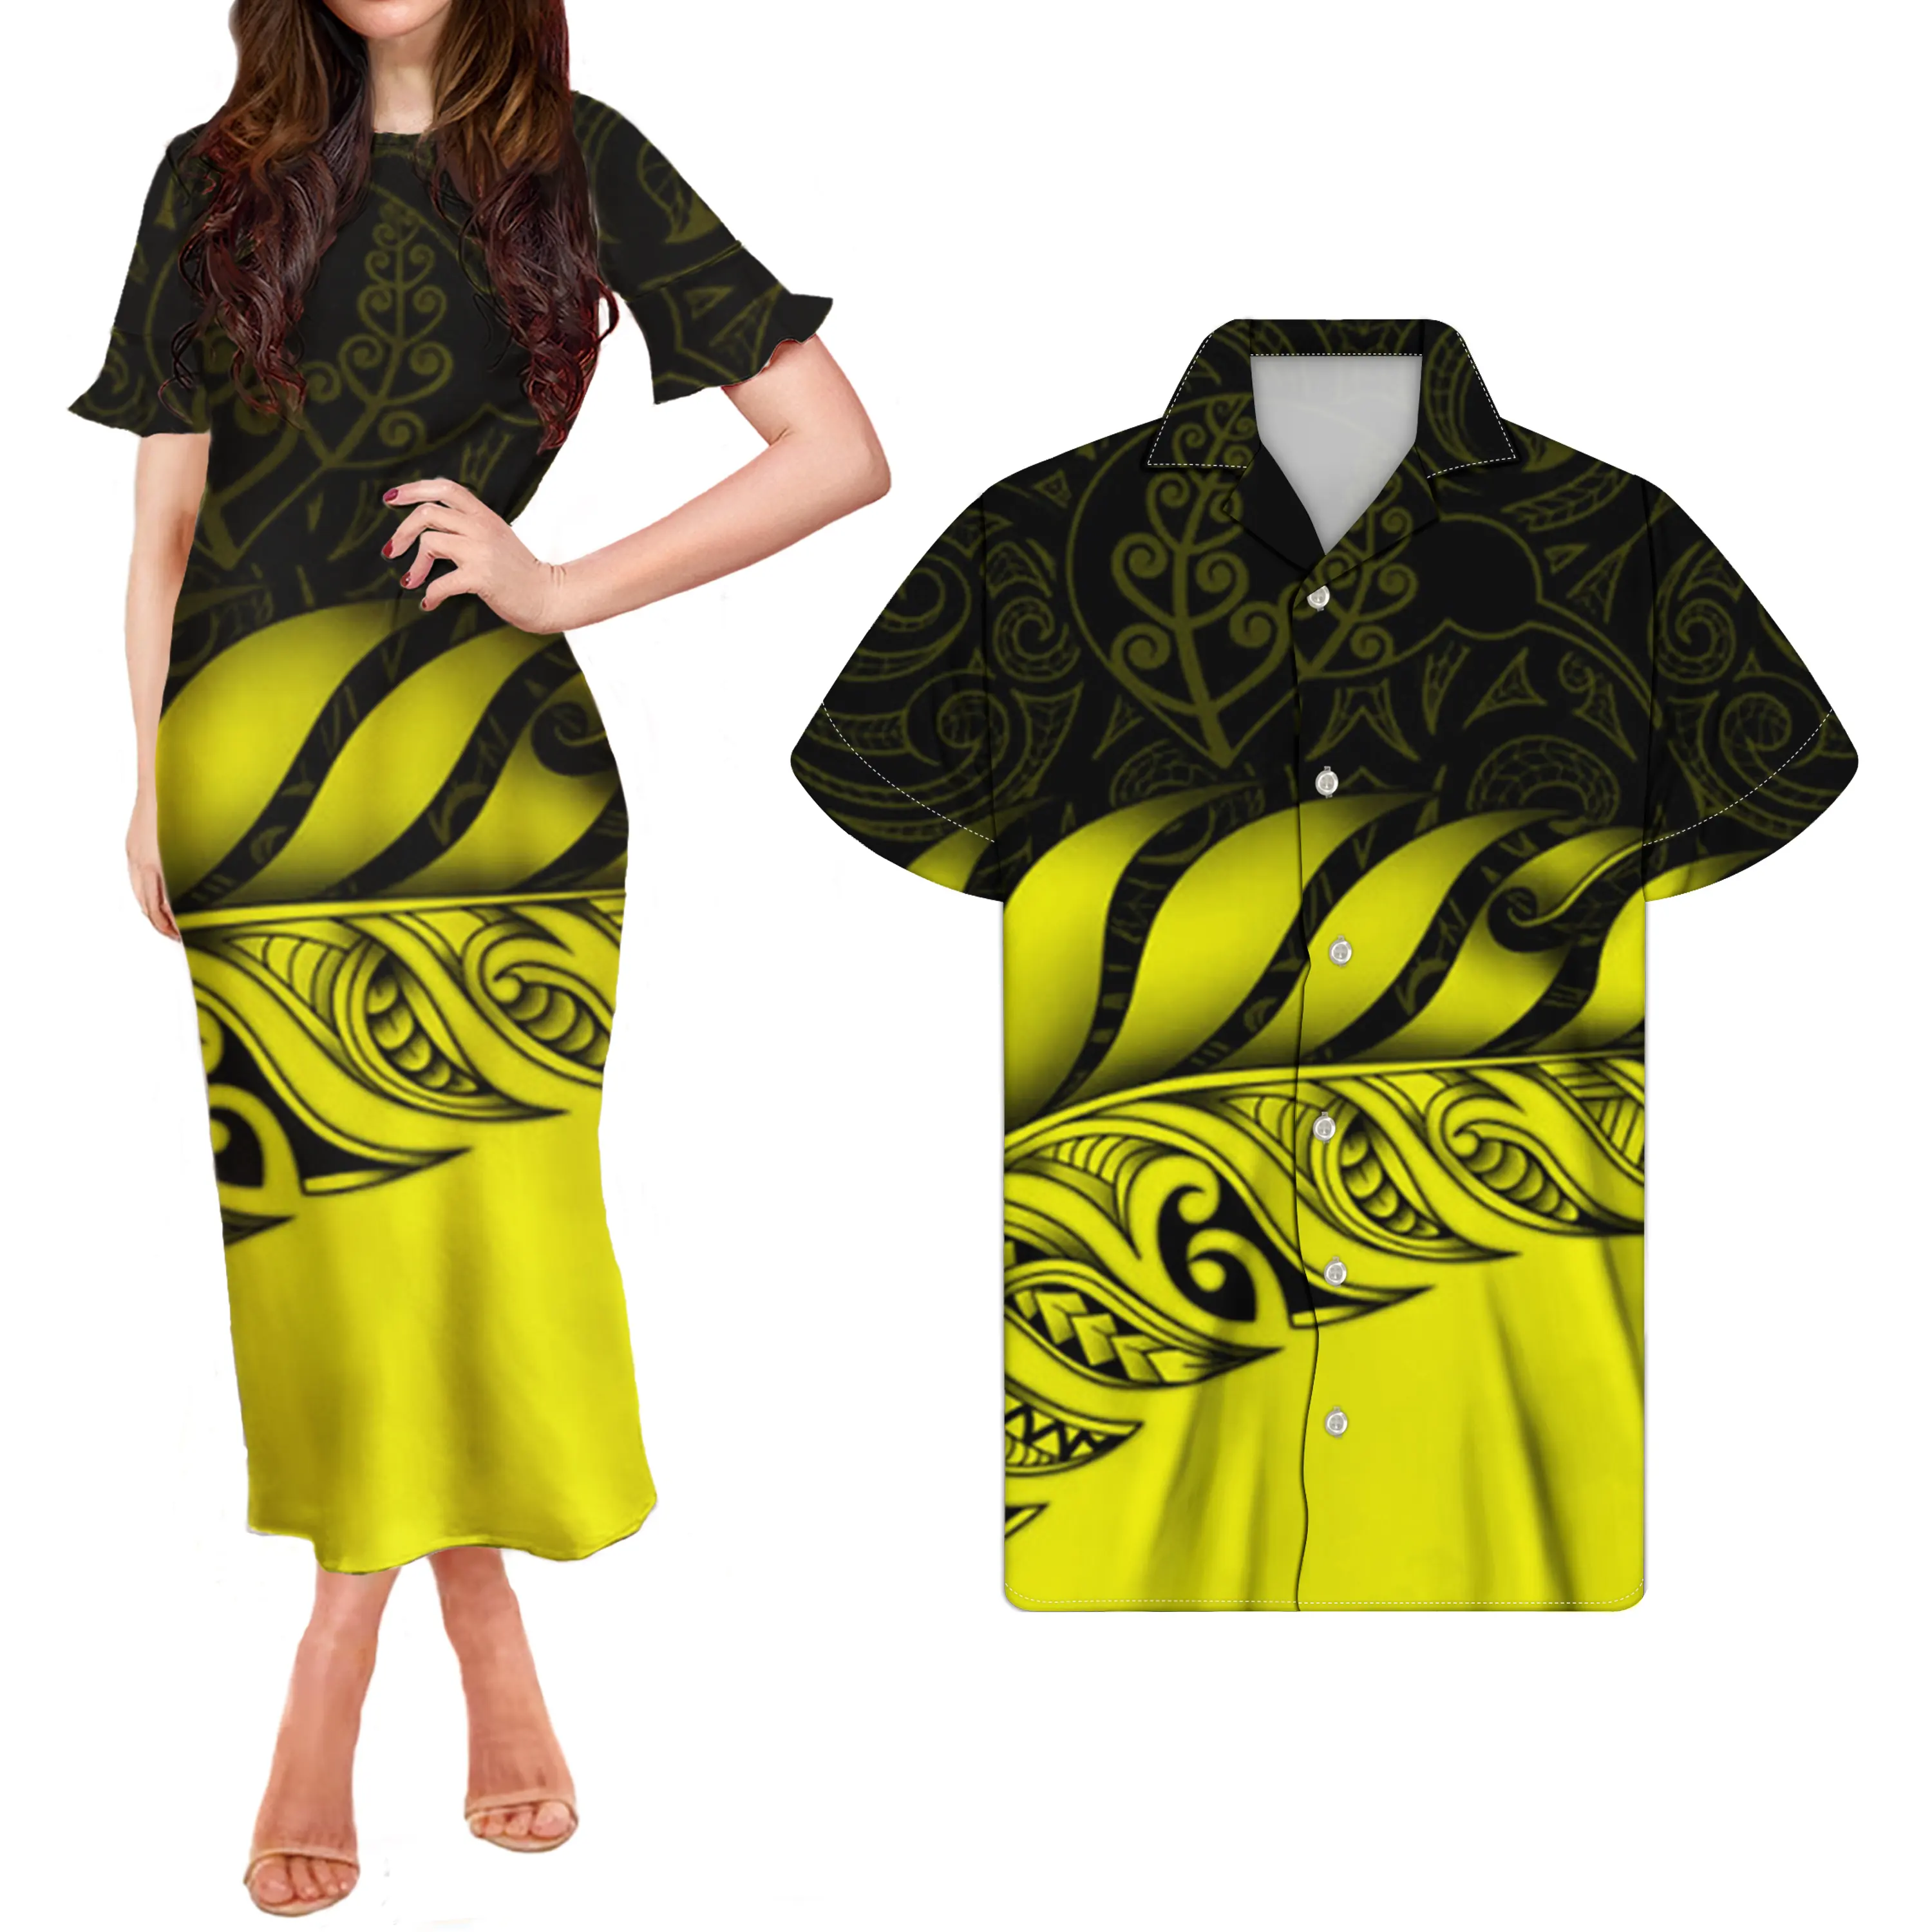 Fancy Beach Clothes For Couples Custom Elegant Long Skirts For Women Yellow Polynesian Tribal Leaf Printing Couple Clothes Set